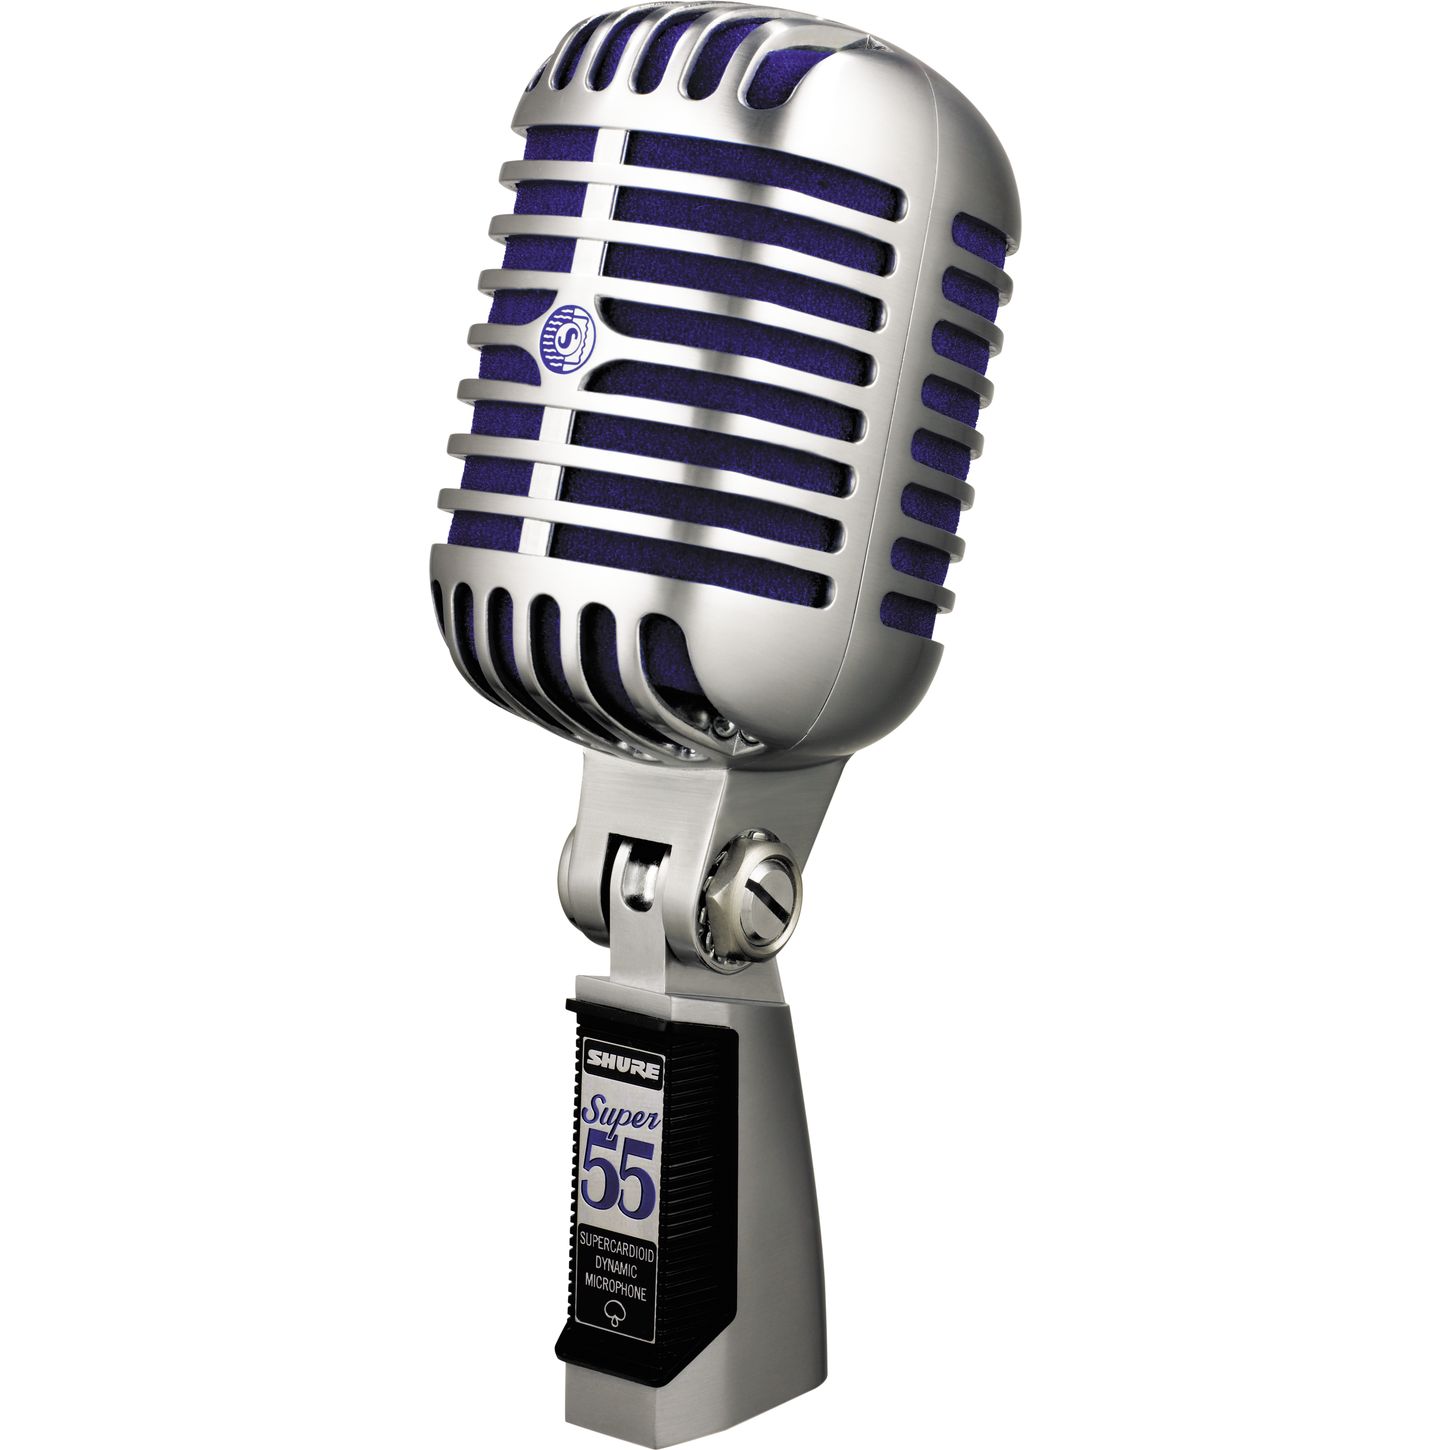 Microphone HD PNG-PlusPNG.com